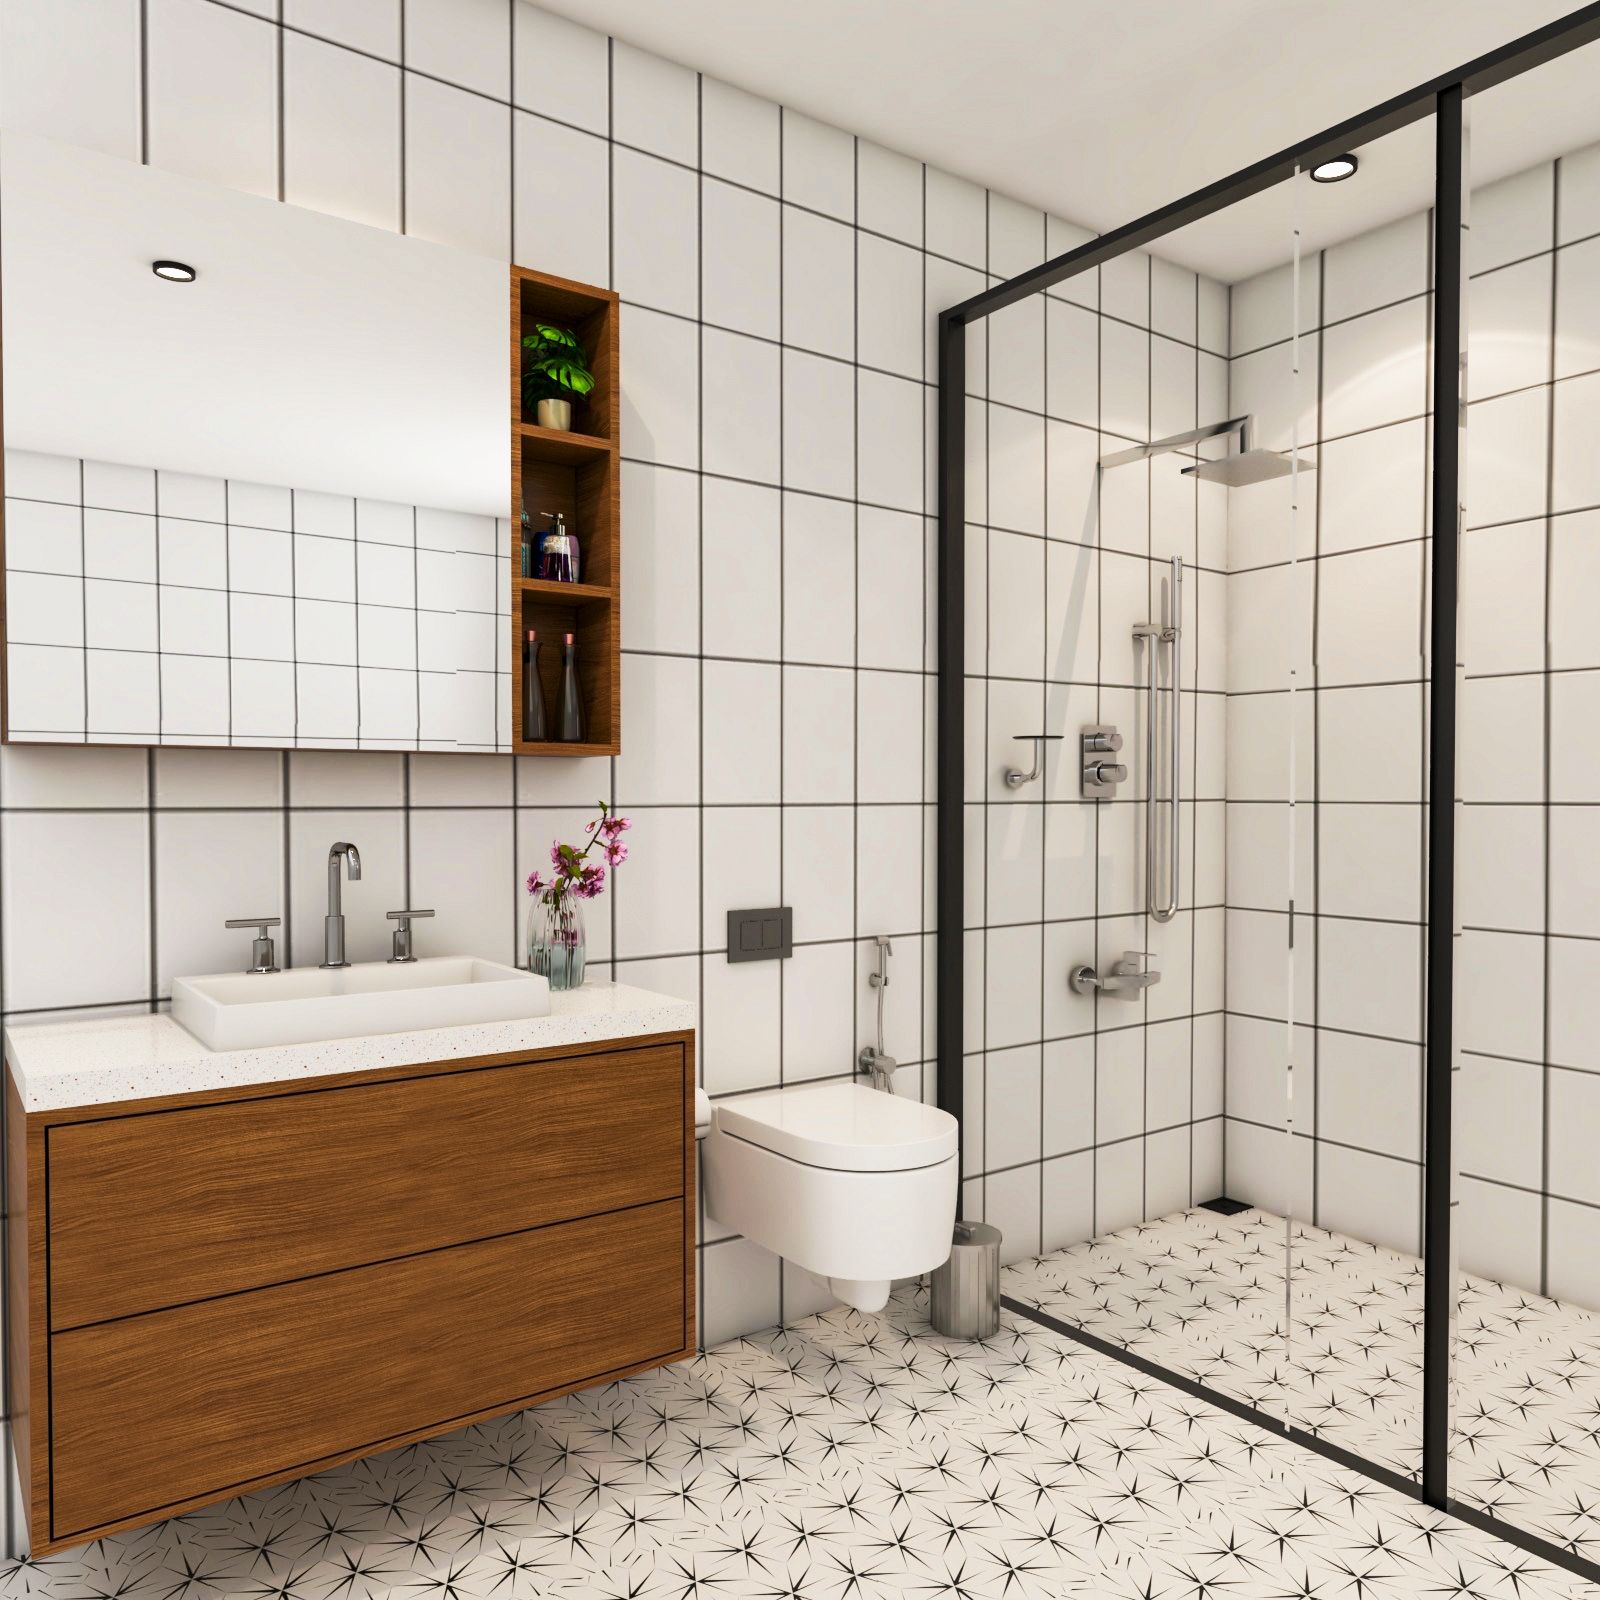 Modern Black And White Small Bathroom Design With Patterned Flooring